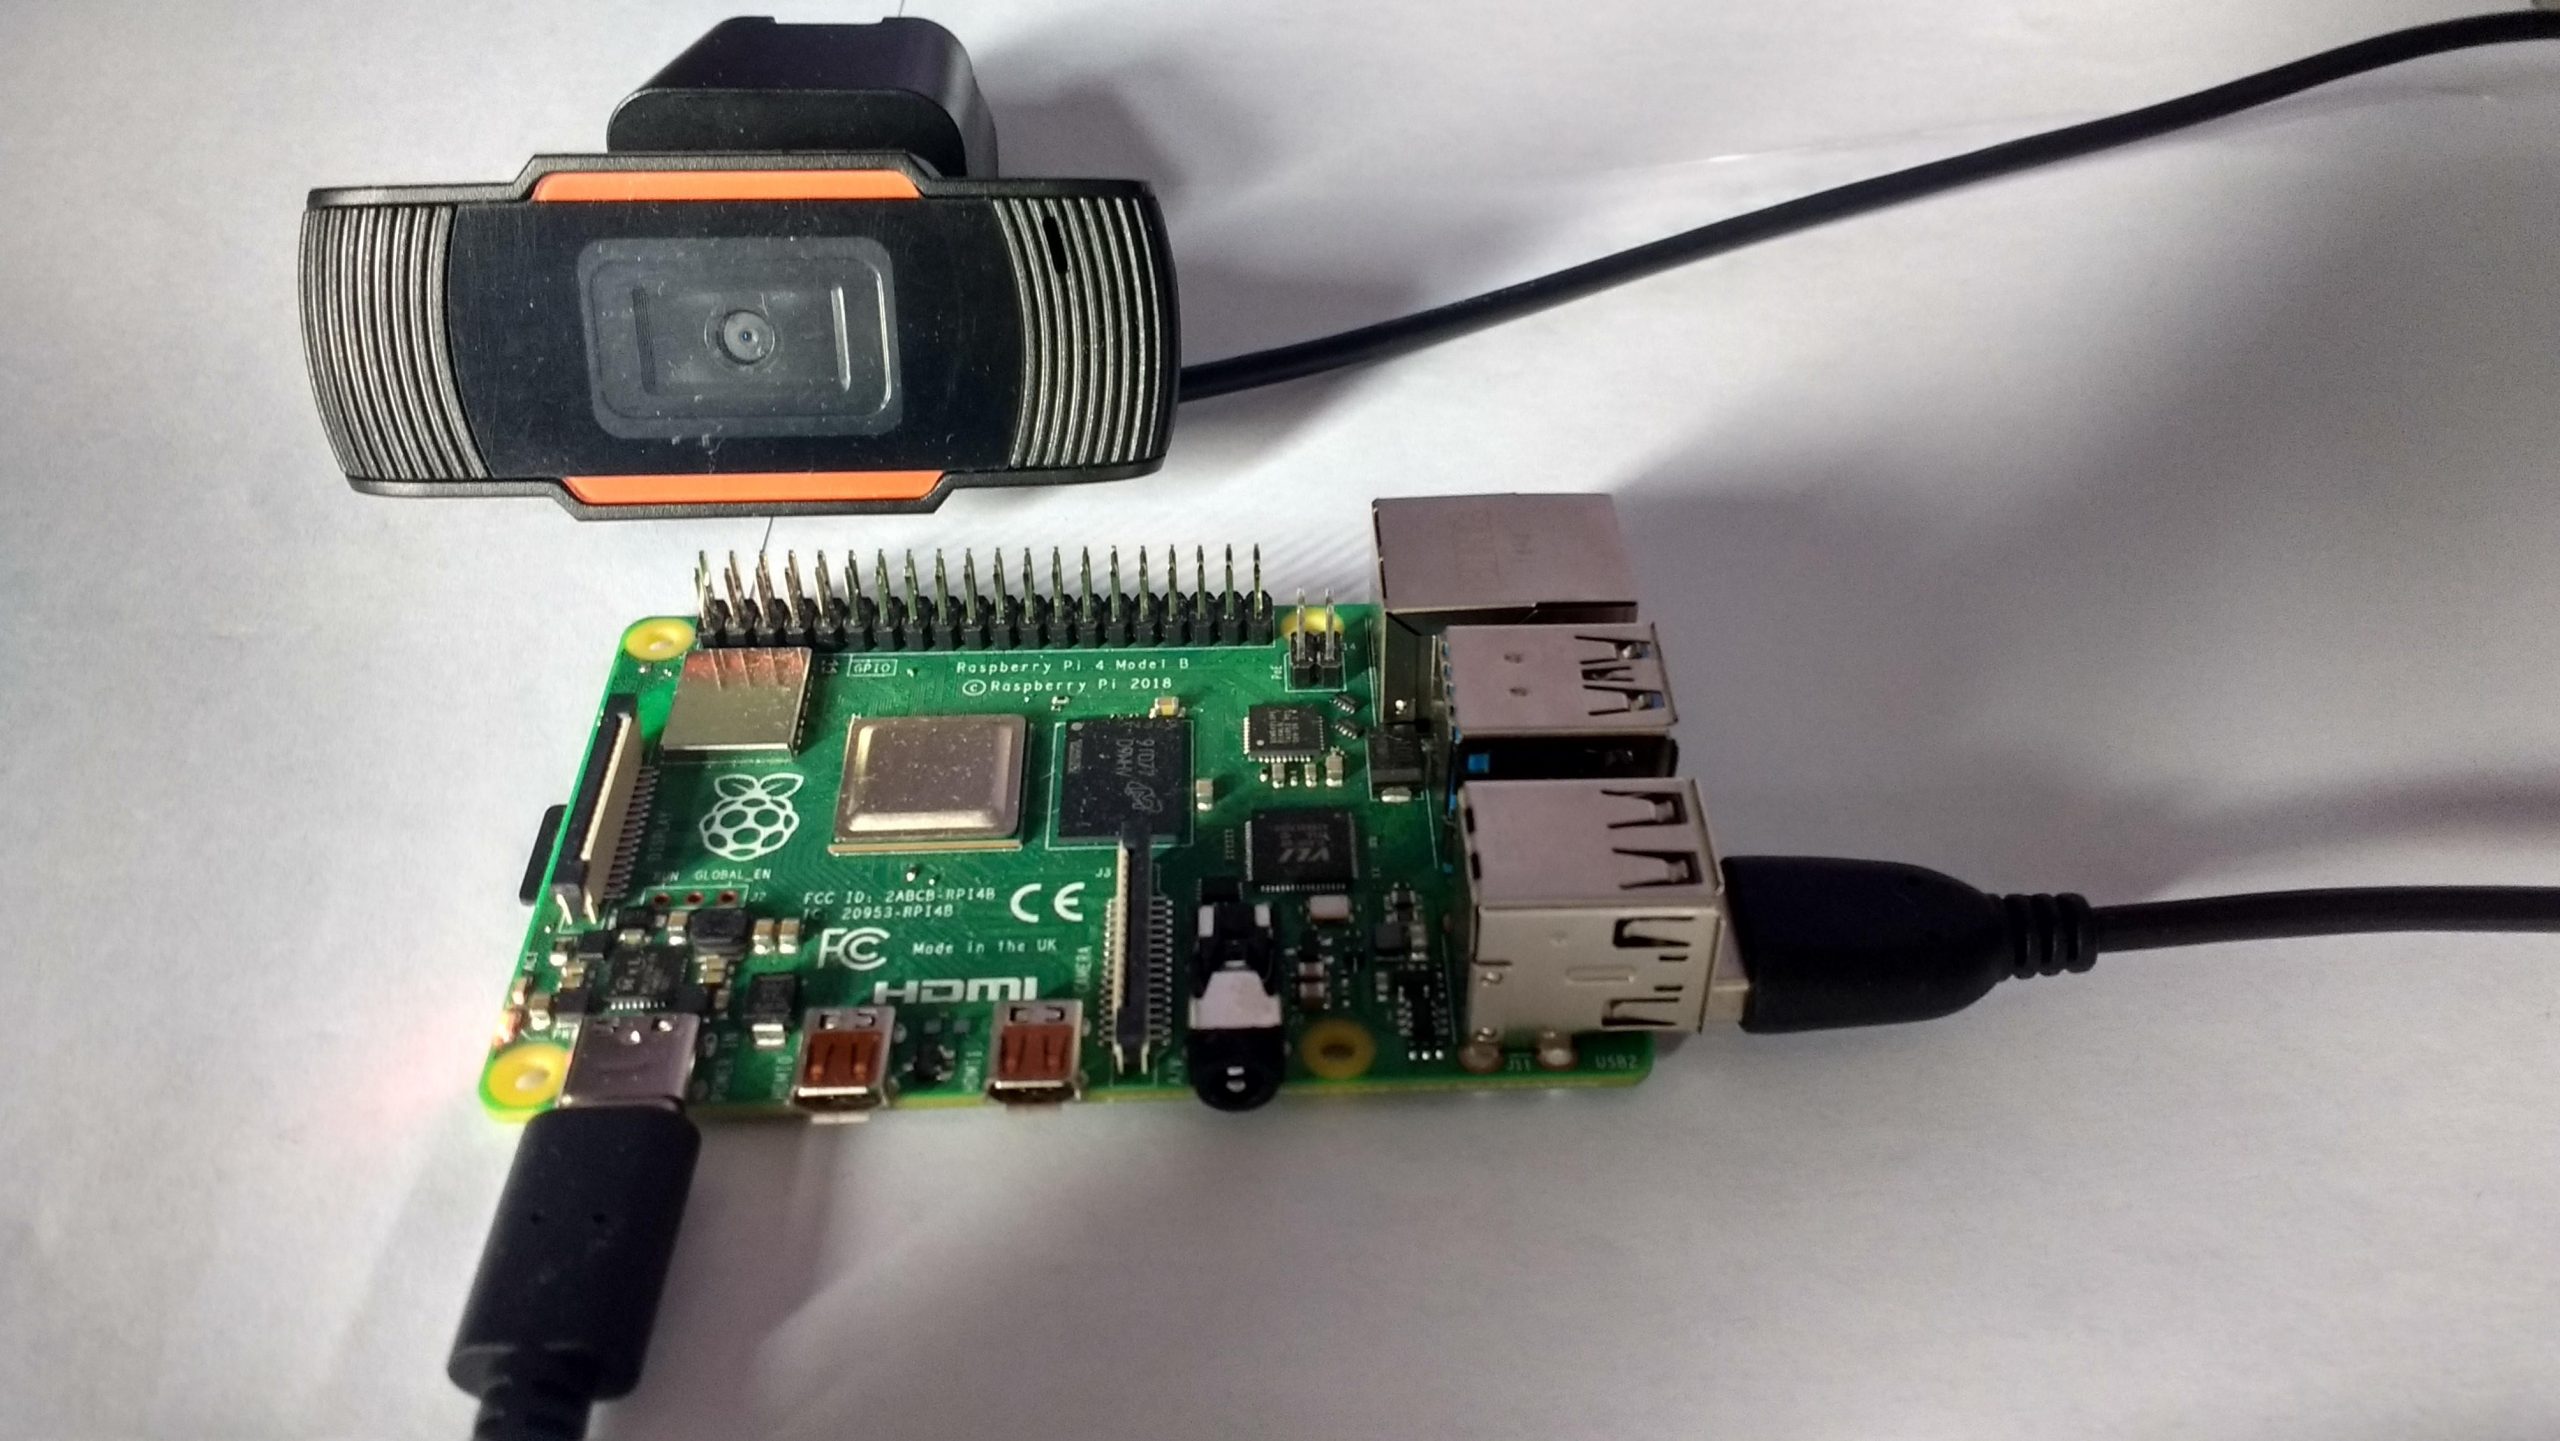 Face Detection on a Raspberry Pi